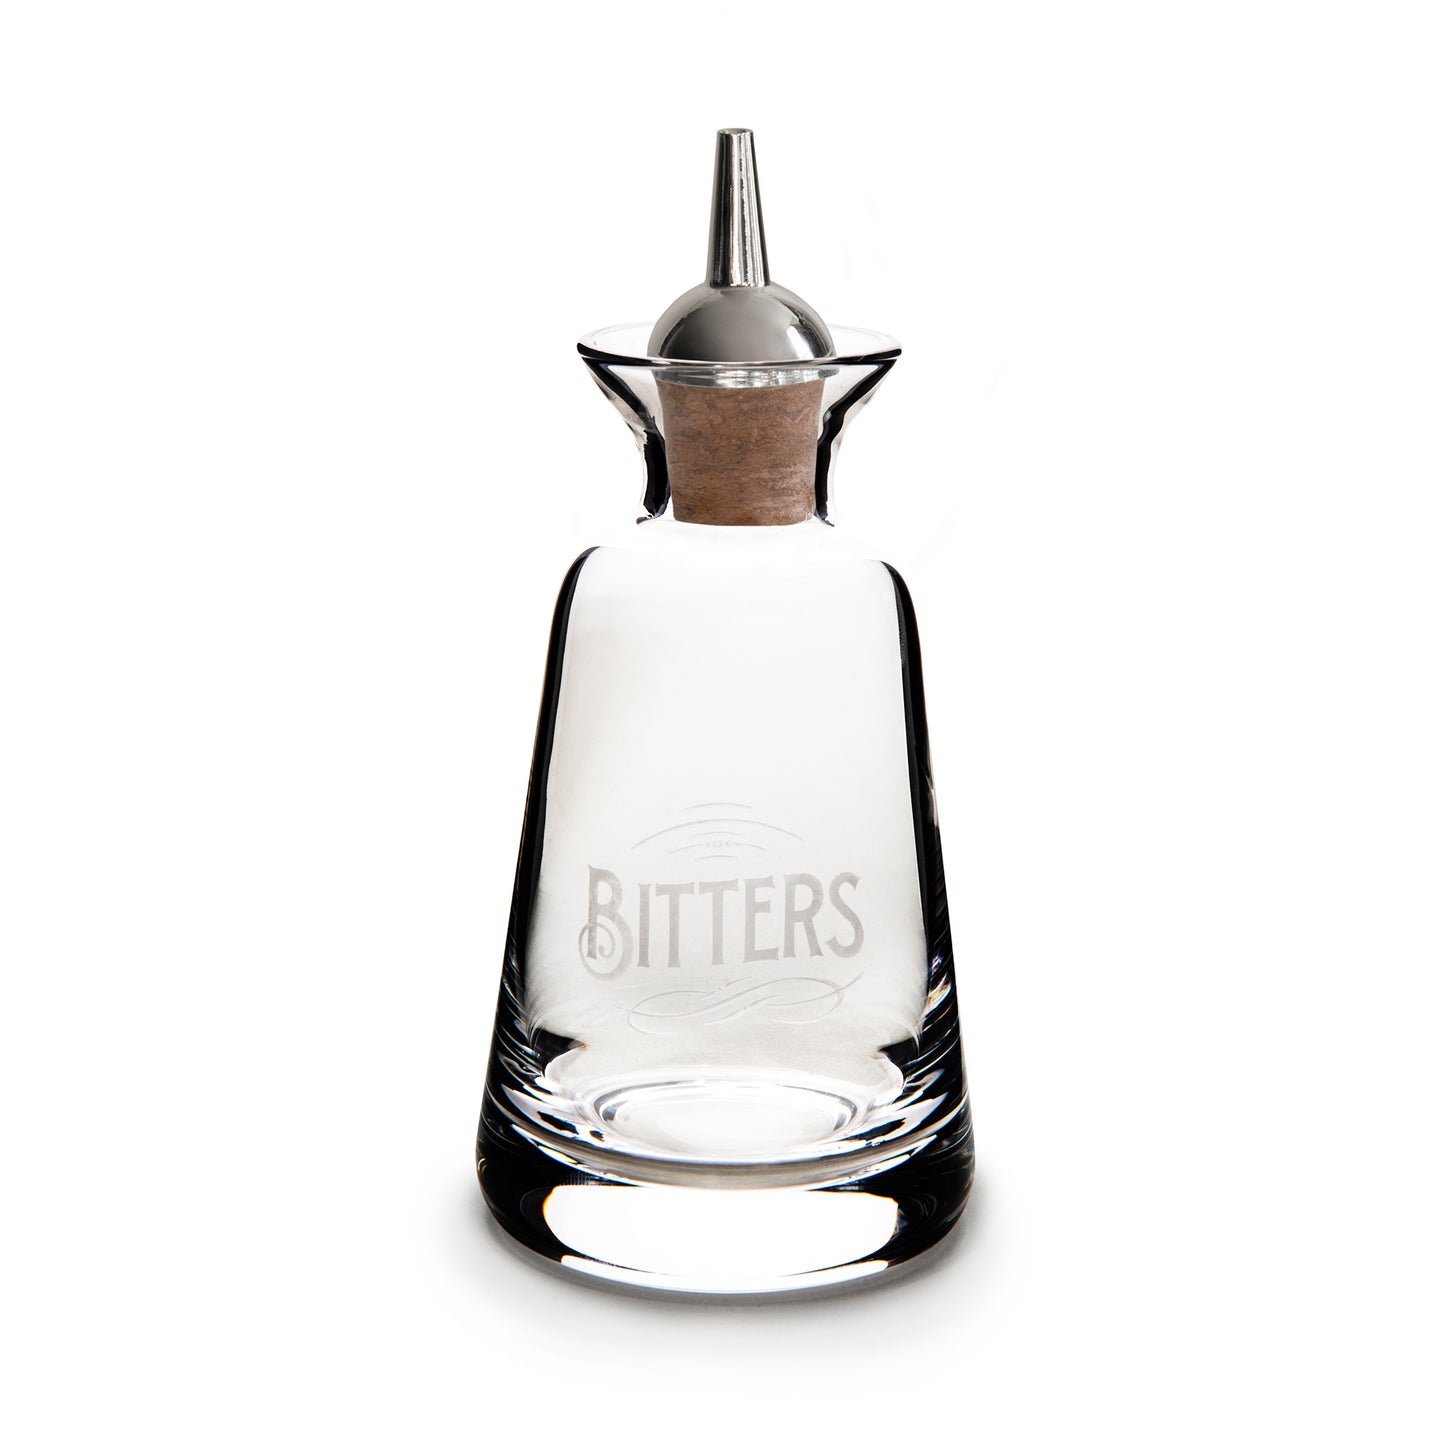 FINEWELL™ BITTERS BOTTLES ENGRAVERS STYLE BITTERS – SILVER-PLATED DASHER TOP / 3oz (90ml)